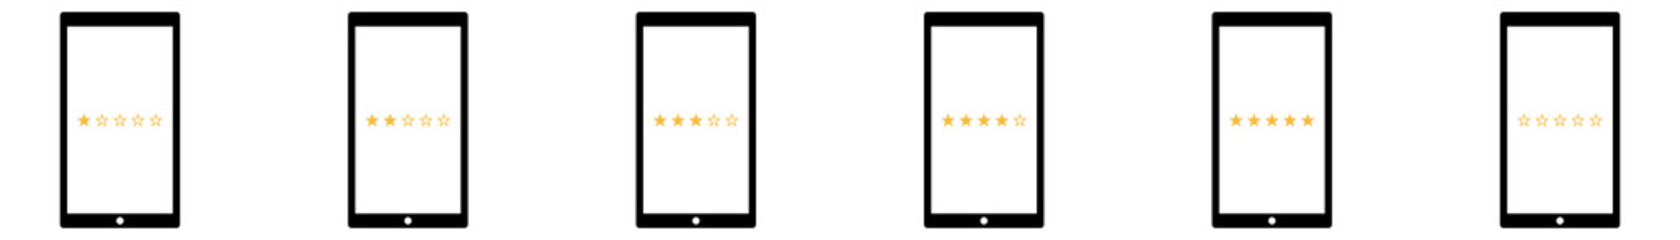 Phone rating - Stars - Review set of icons - Yellow stars enclosed in a phone